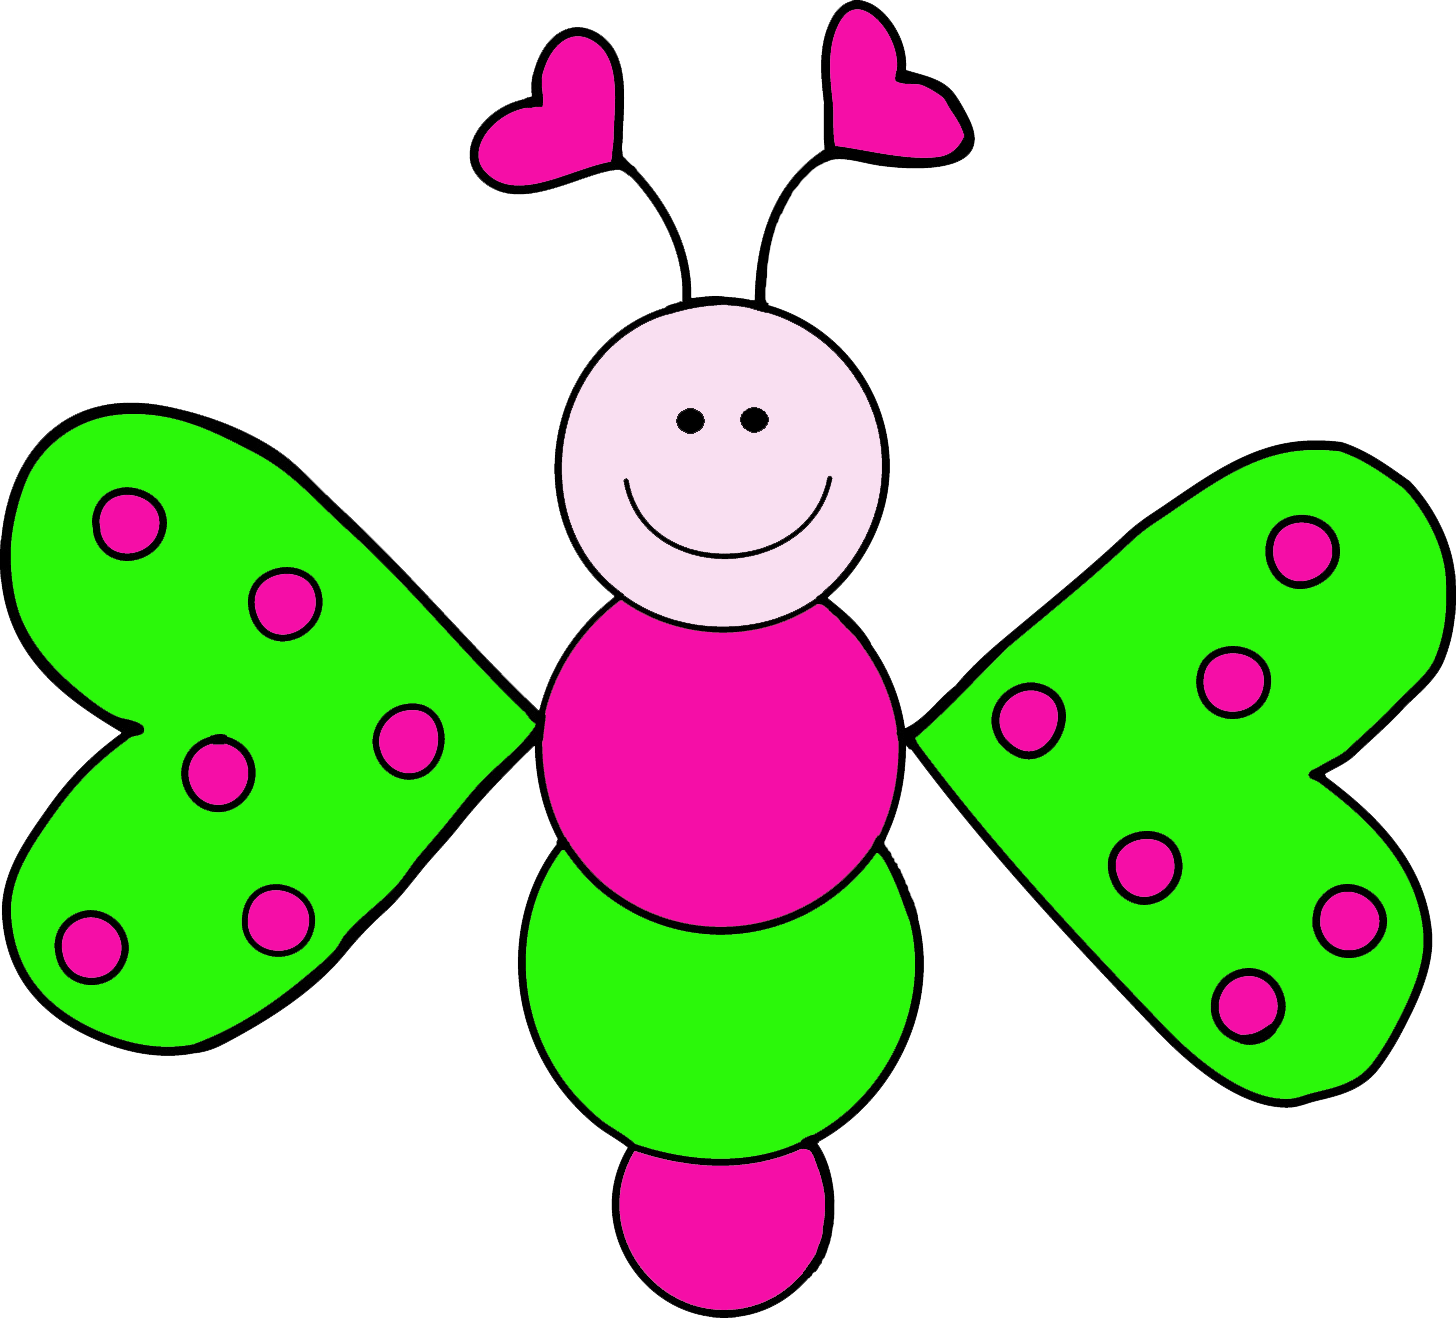 Butterfly clipart free images 8